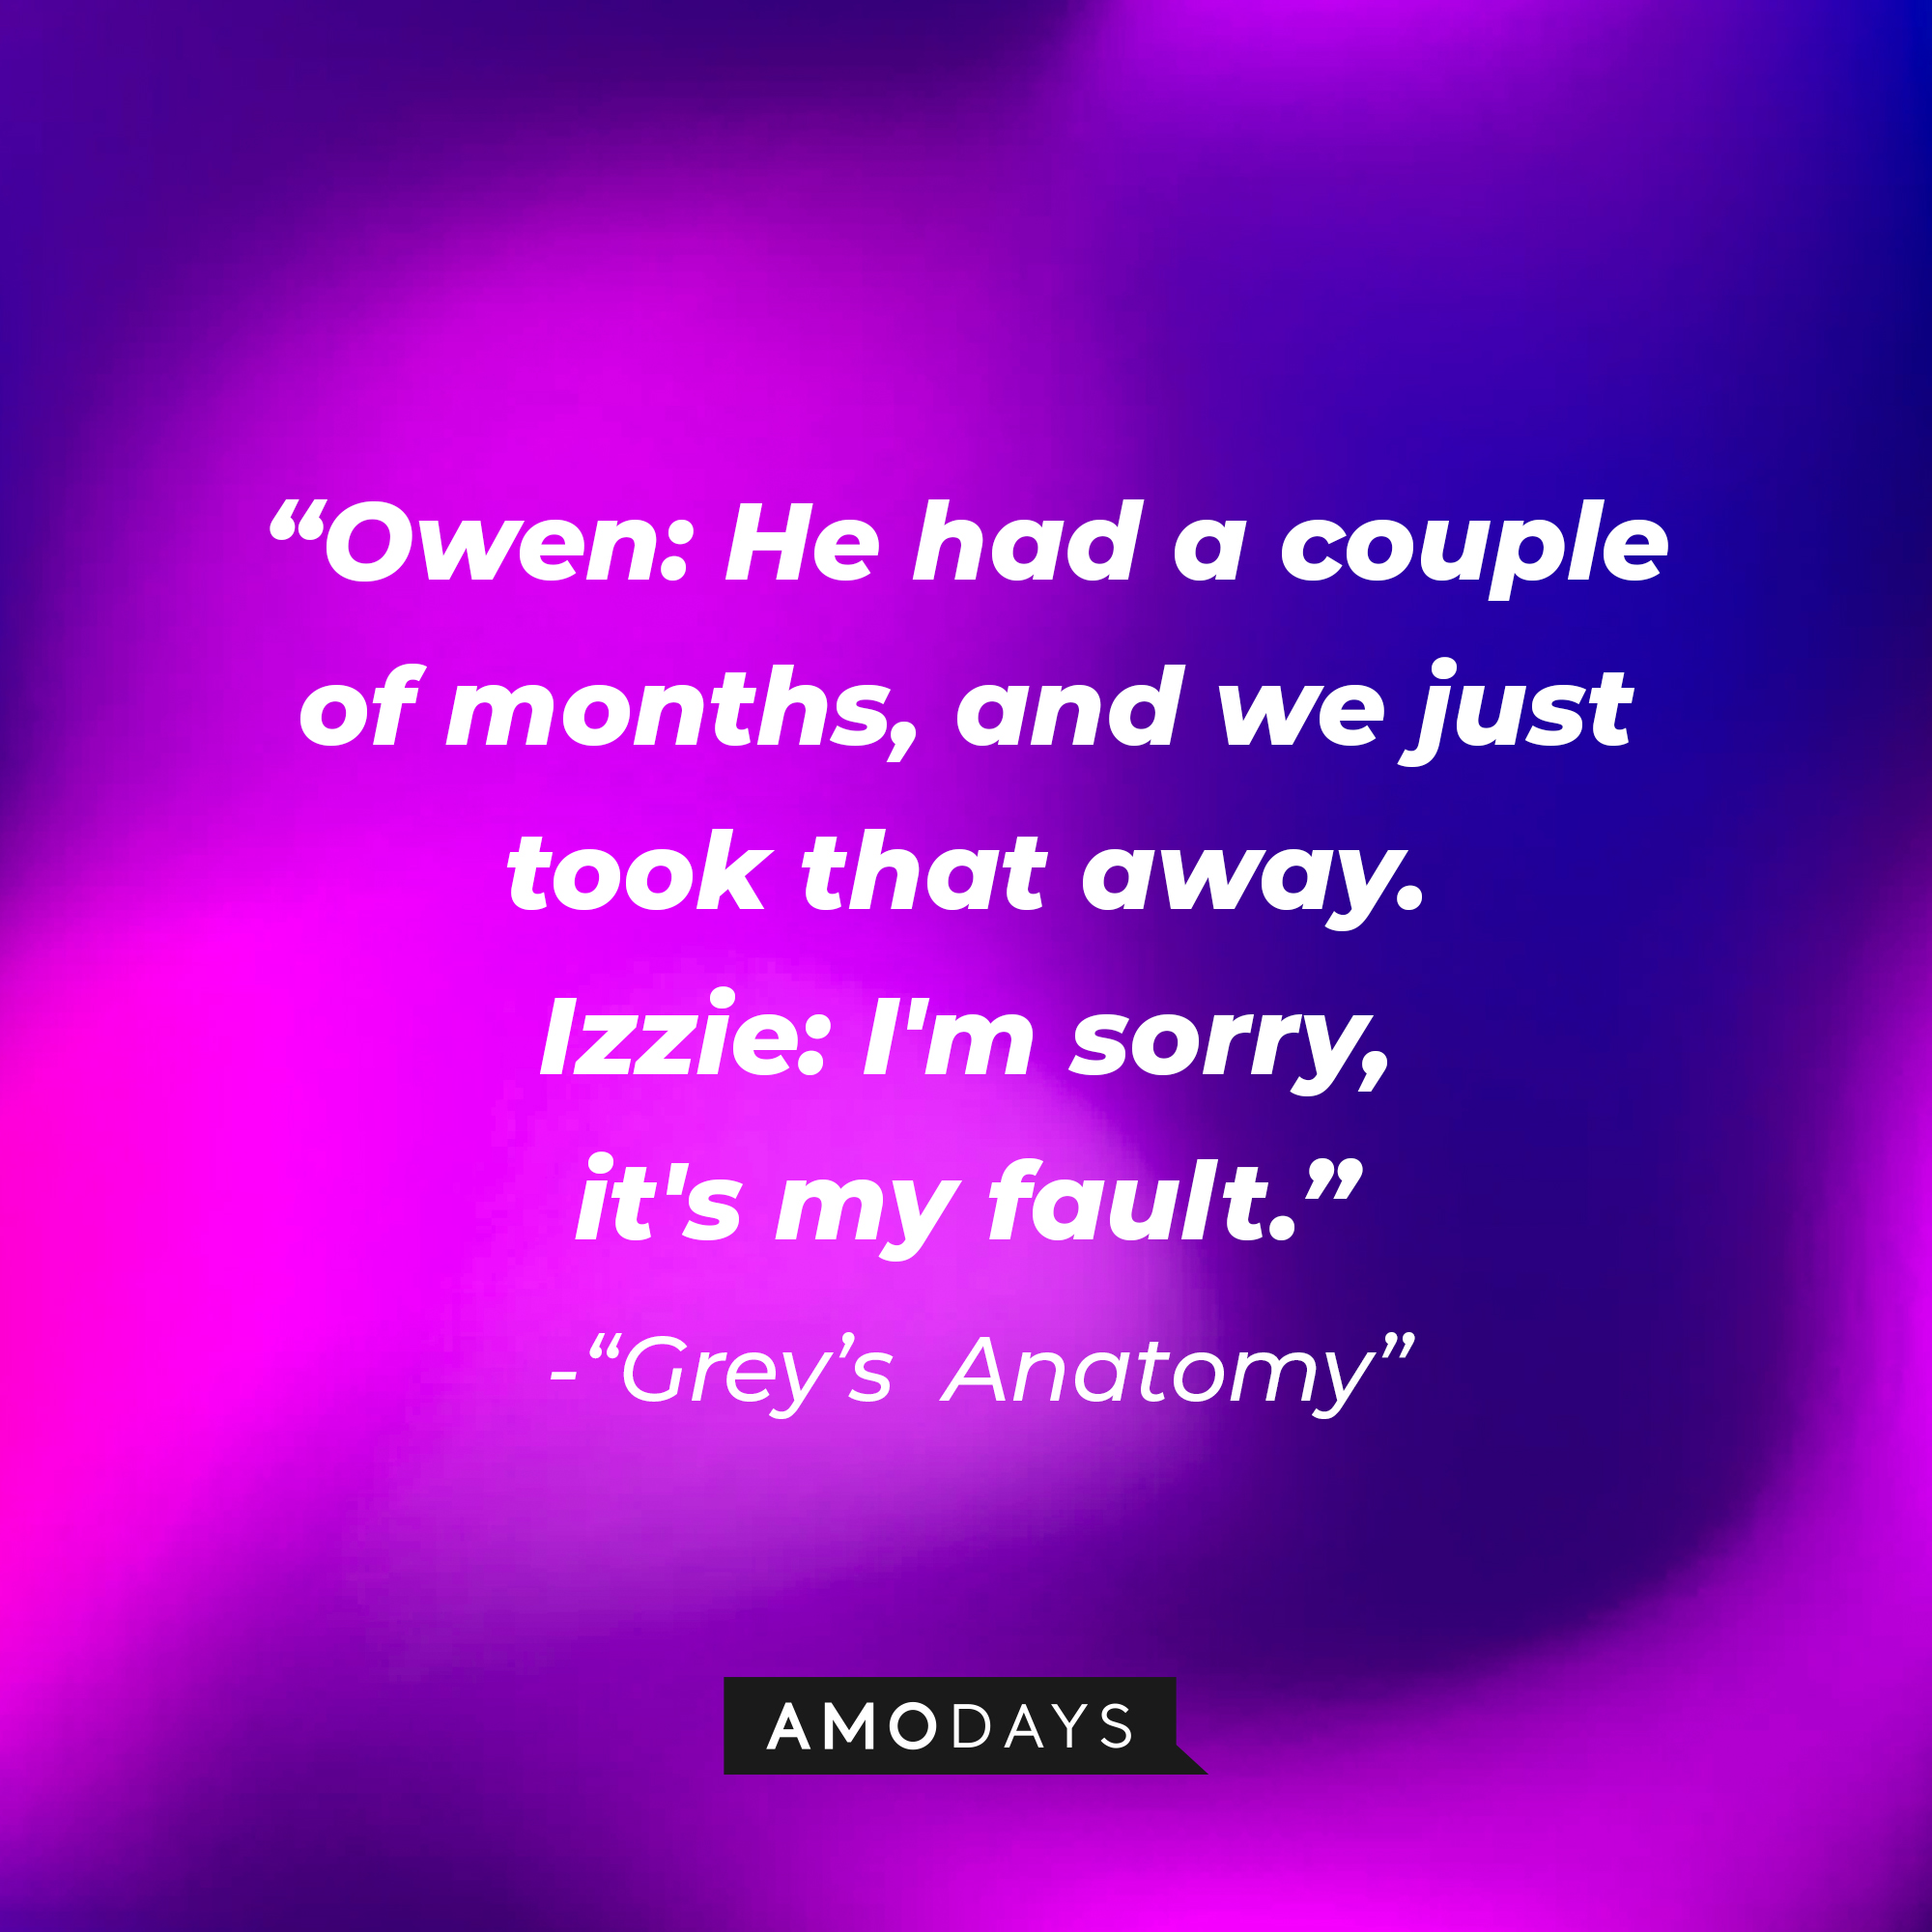 Qwen's quote: "He had a couple of months, and we just took that away." Izzie: "I'm sorry. it's my fault." | Image: Amodays